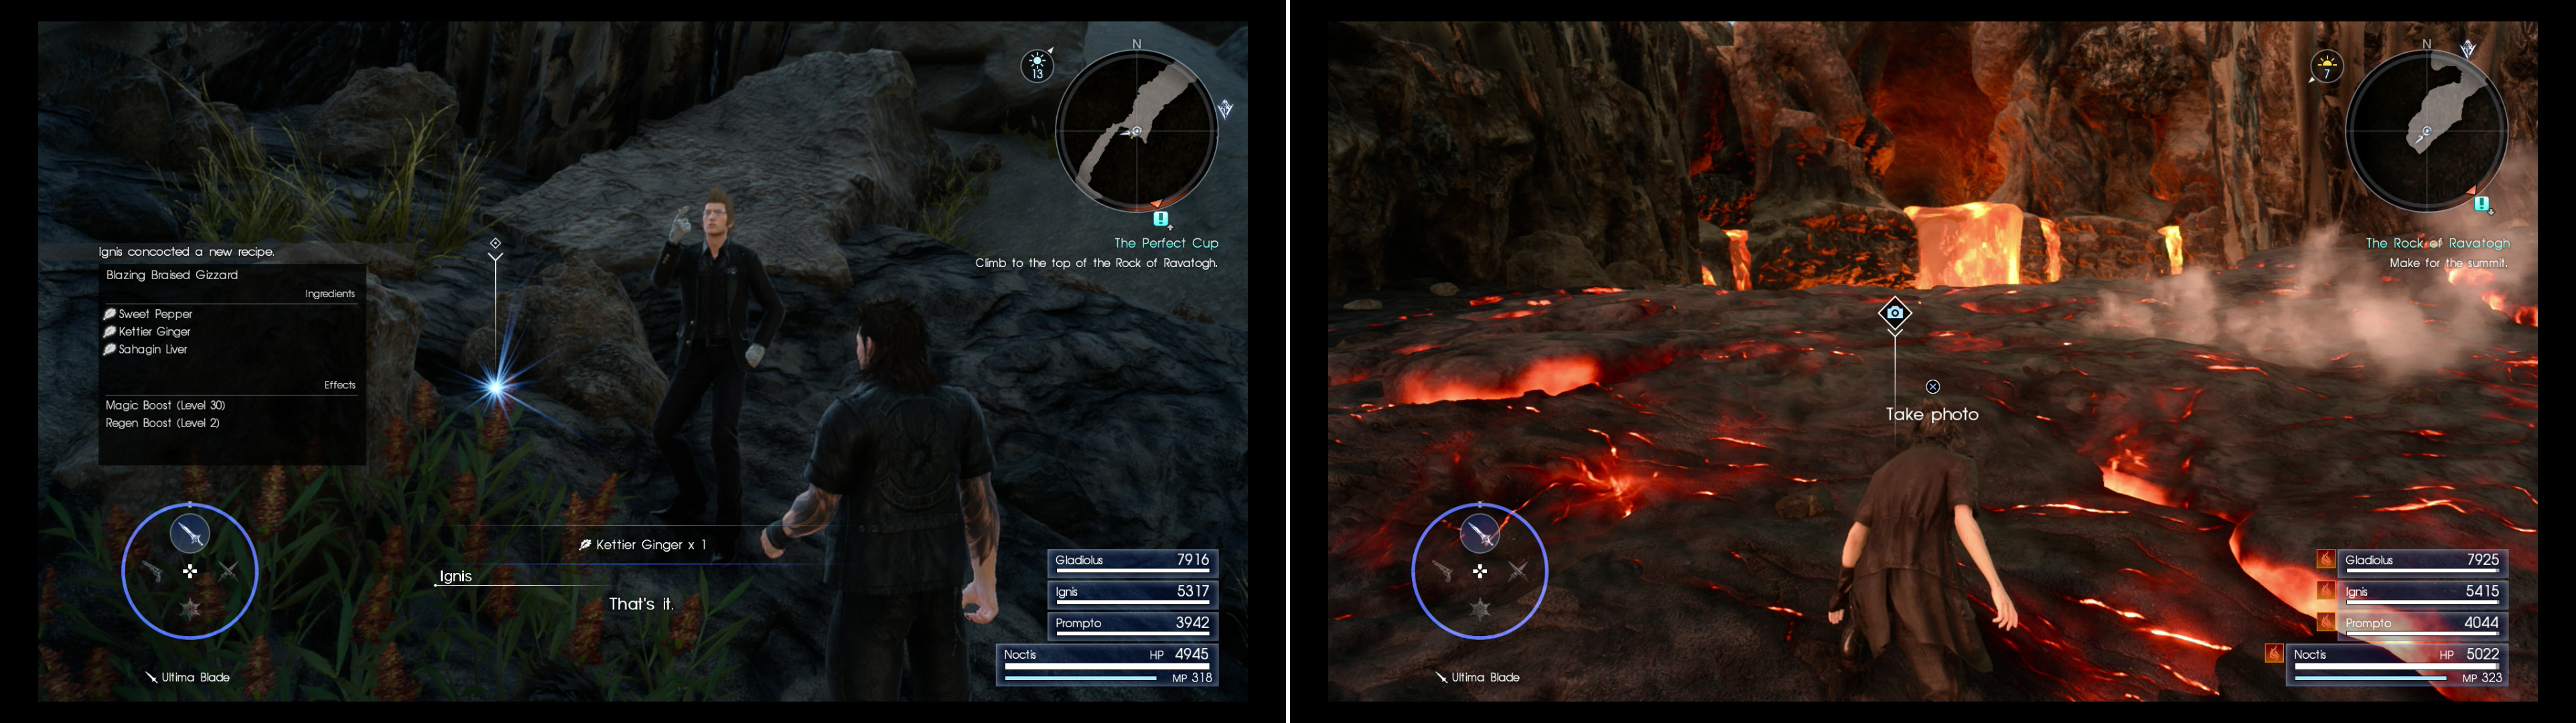 Grab some Kettier Ginger during your climb to teach Ignis a new recipe 9left). After braving a fiery slope you’ll be able to snap the photo Vyv wants (right).